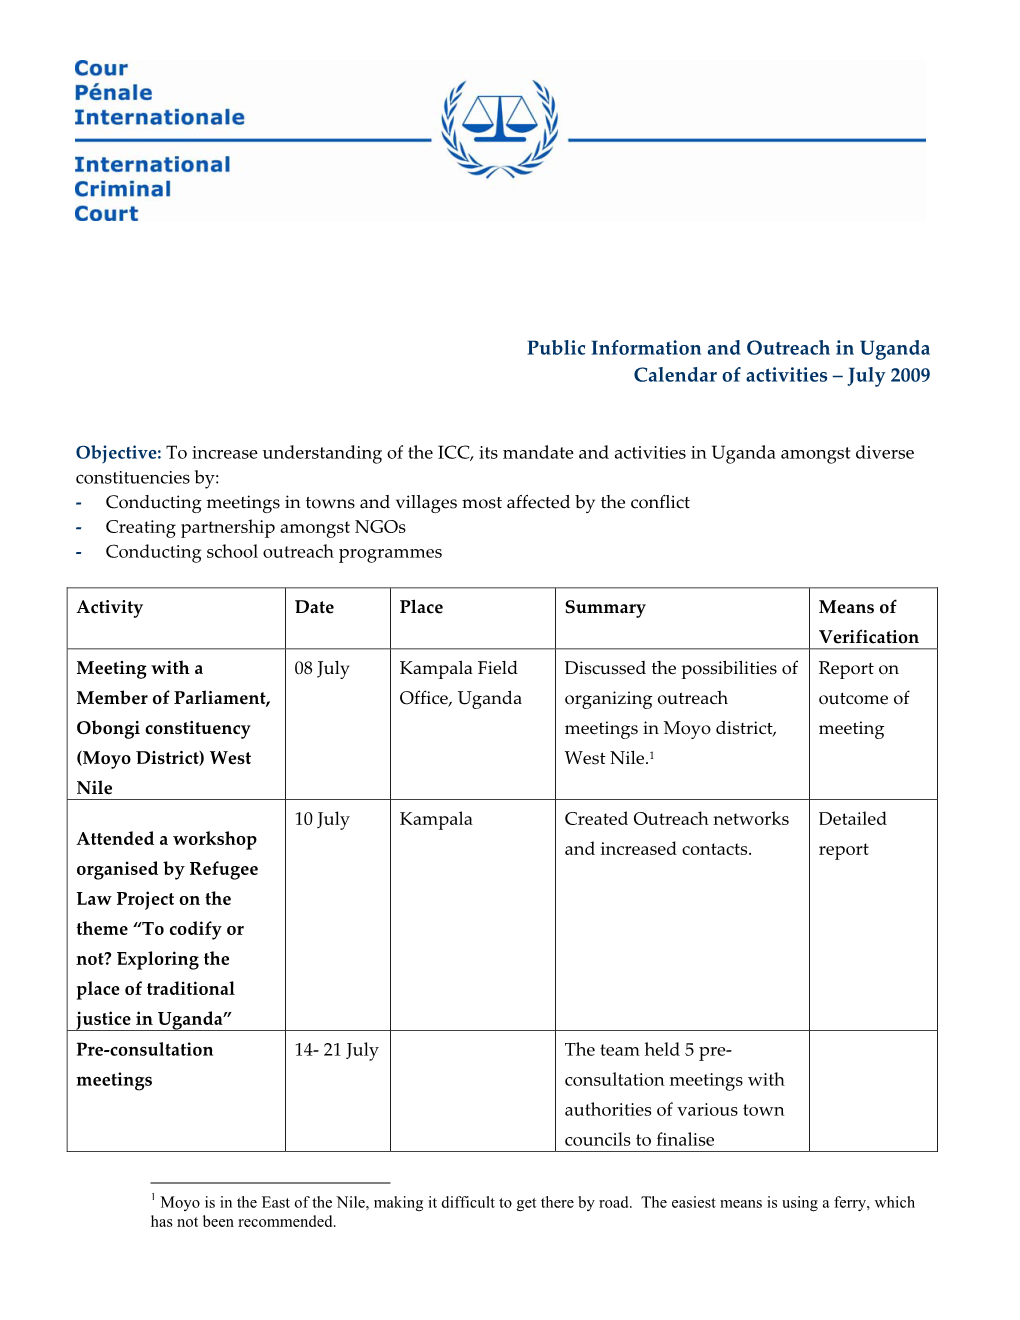 Public Information and Outreach in Uganda Calendar of Activities – July 2009